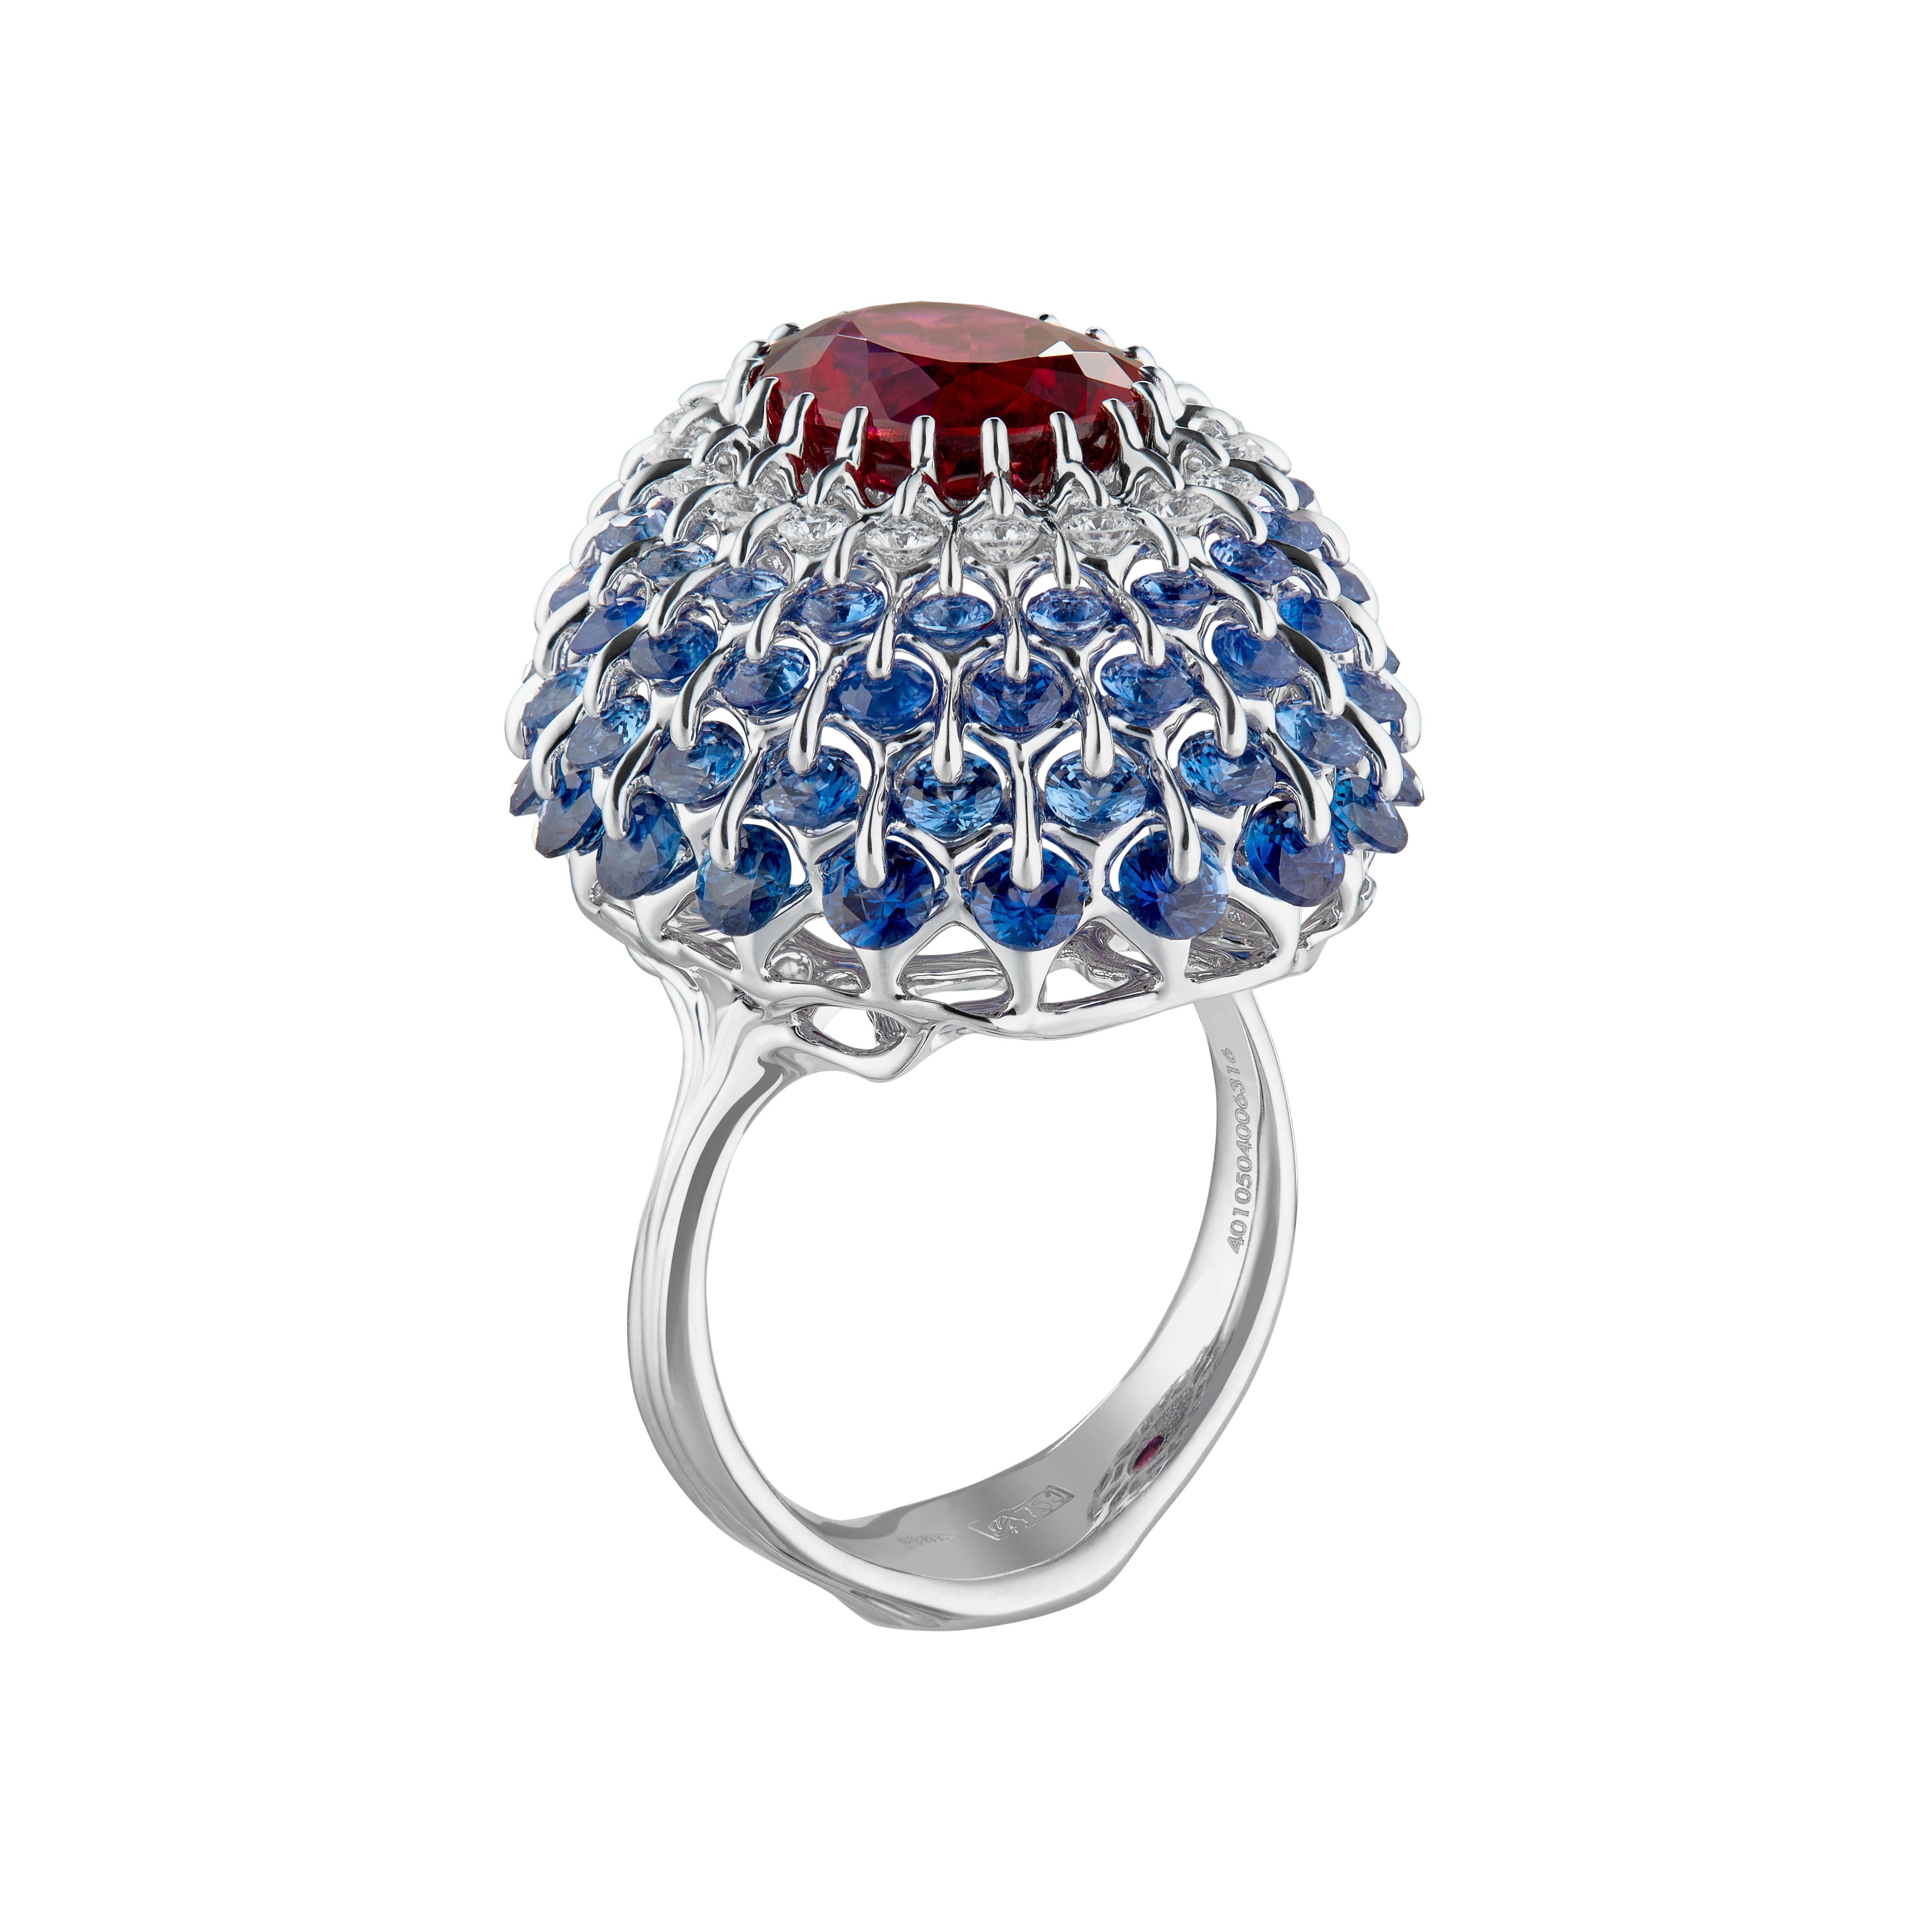 4 carat deep and clean rubellite tourmaline is mounted beautifully in the perfect graduation of diamond and blue sapphire frame. Blue sapphires also cut in diamond shape precisely and carefully selected to make a ball dress-like design (Ball of